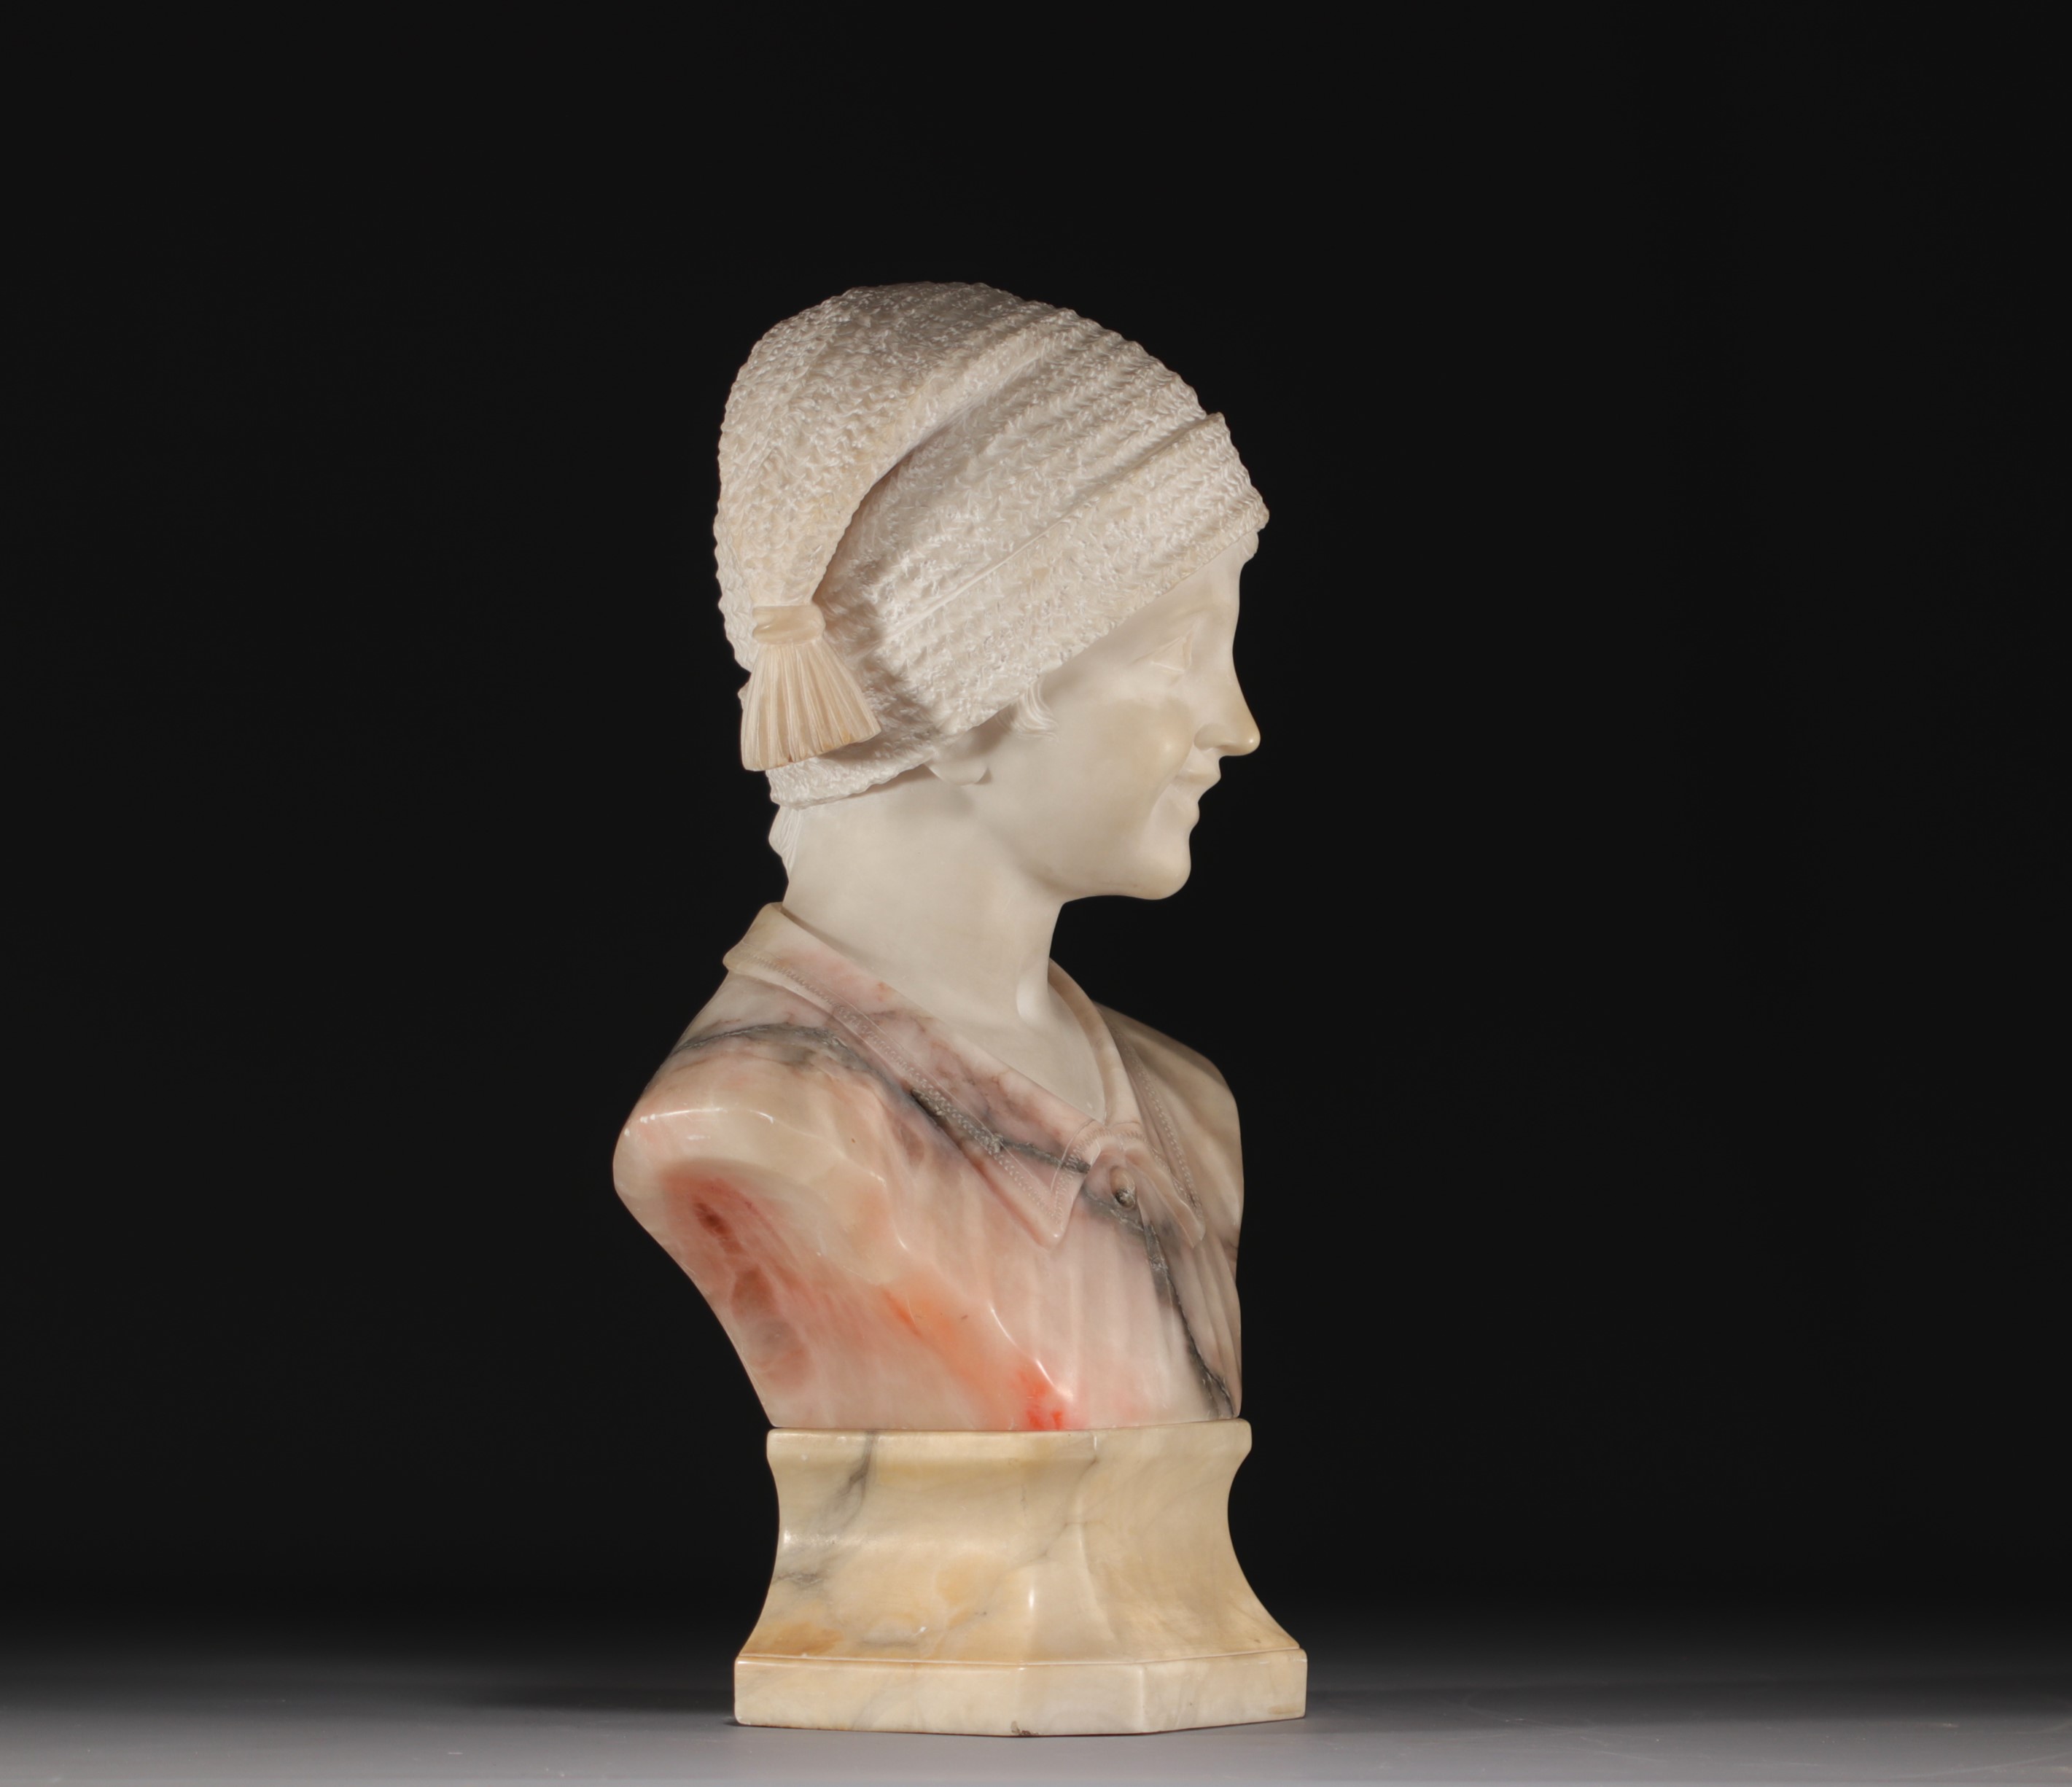 G. PINESCHI - "Young Neapolitan fisherman" Bust in pink alabaster, early 20th century. - Image 2 of 3